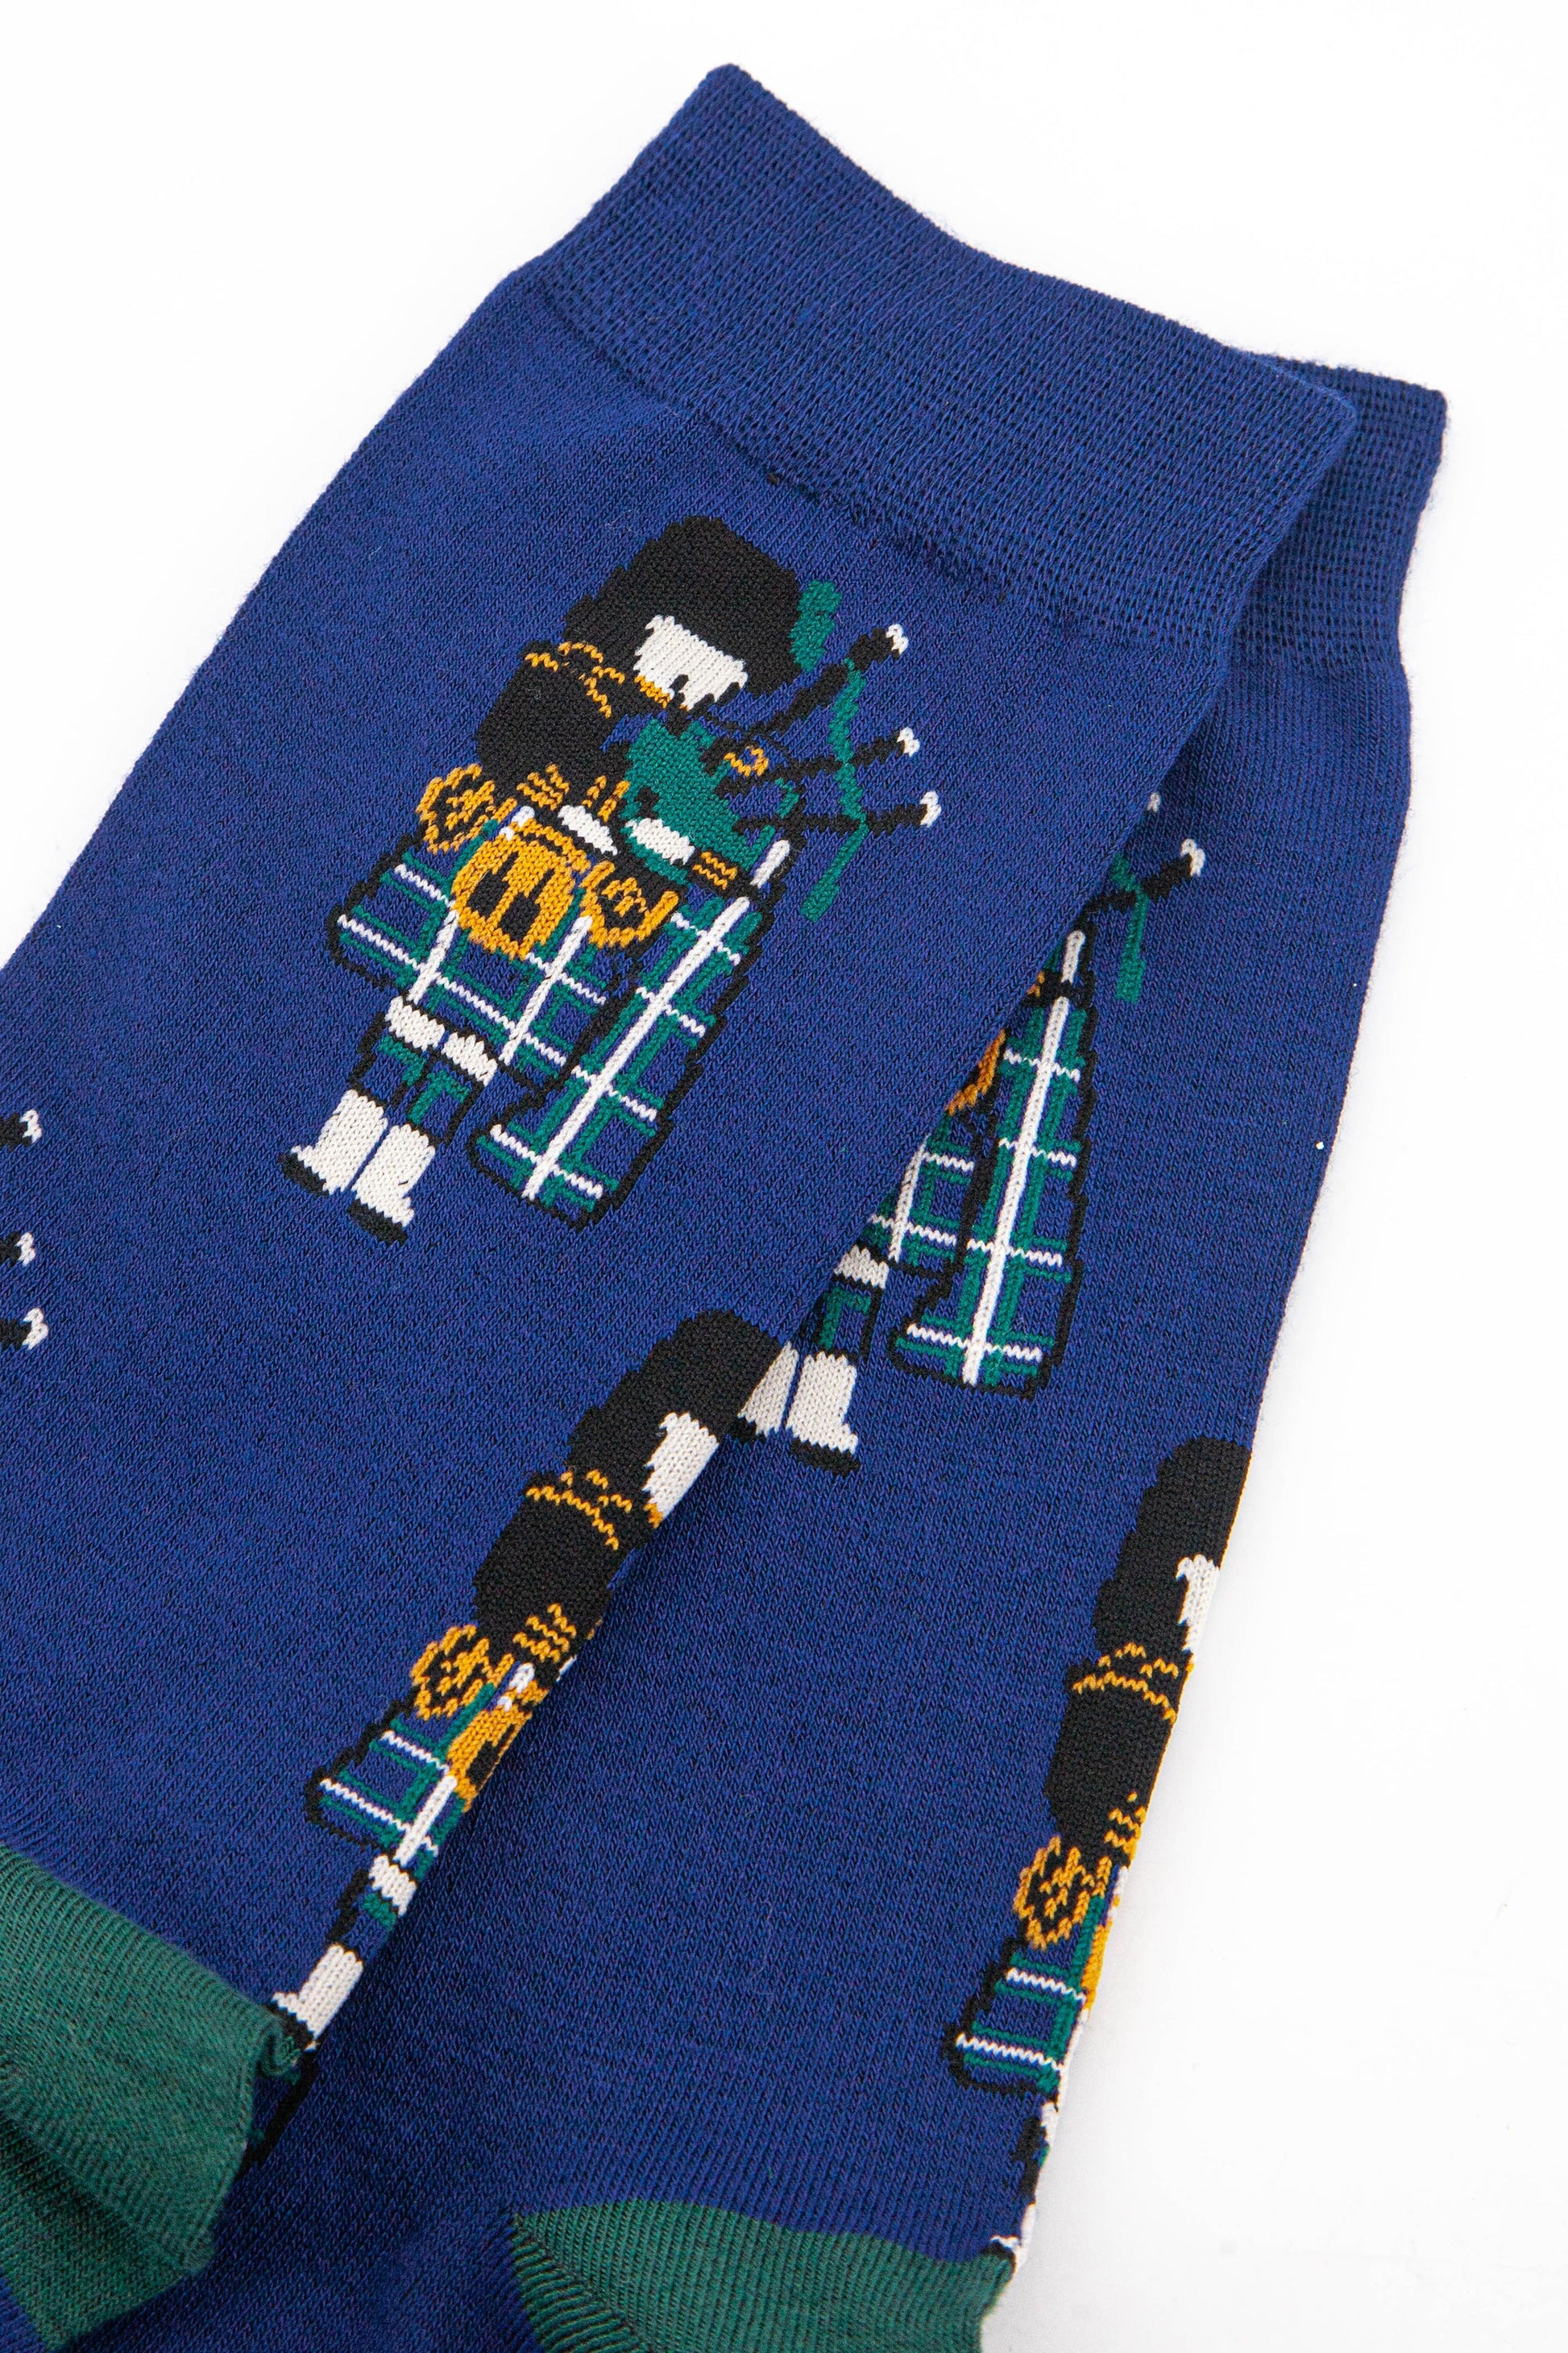 close up of the traditional Scottish piper on the ankle of the socks